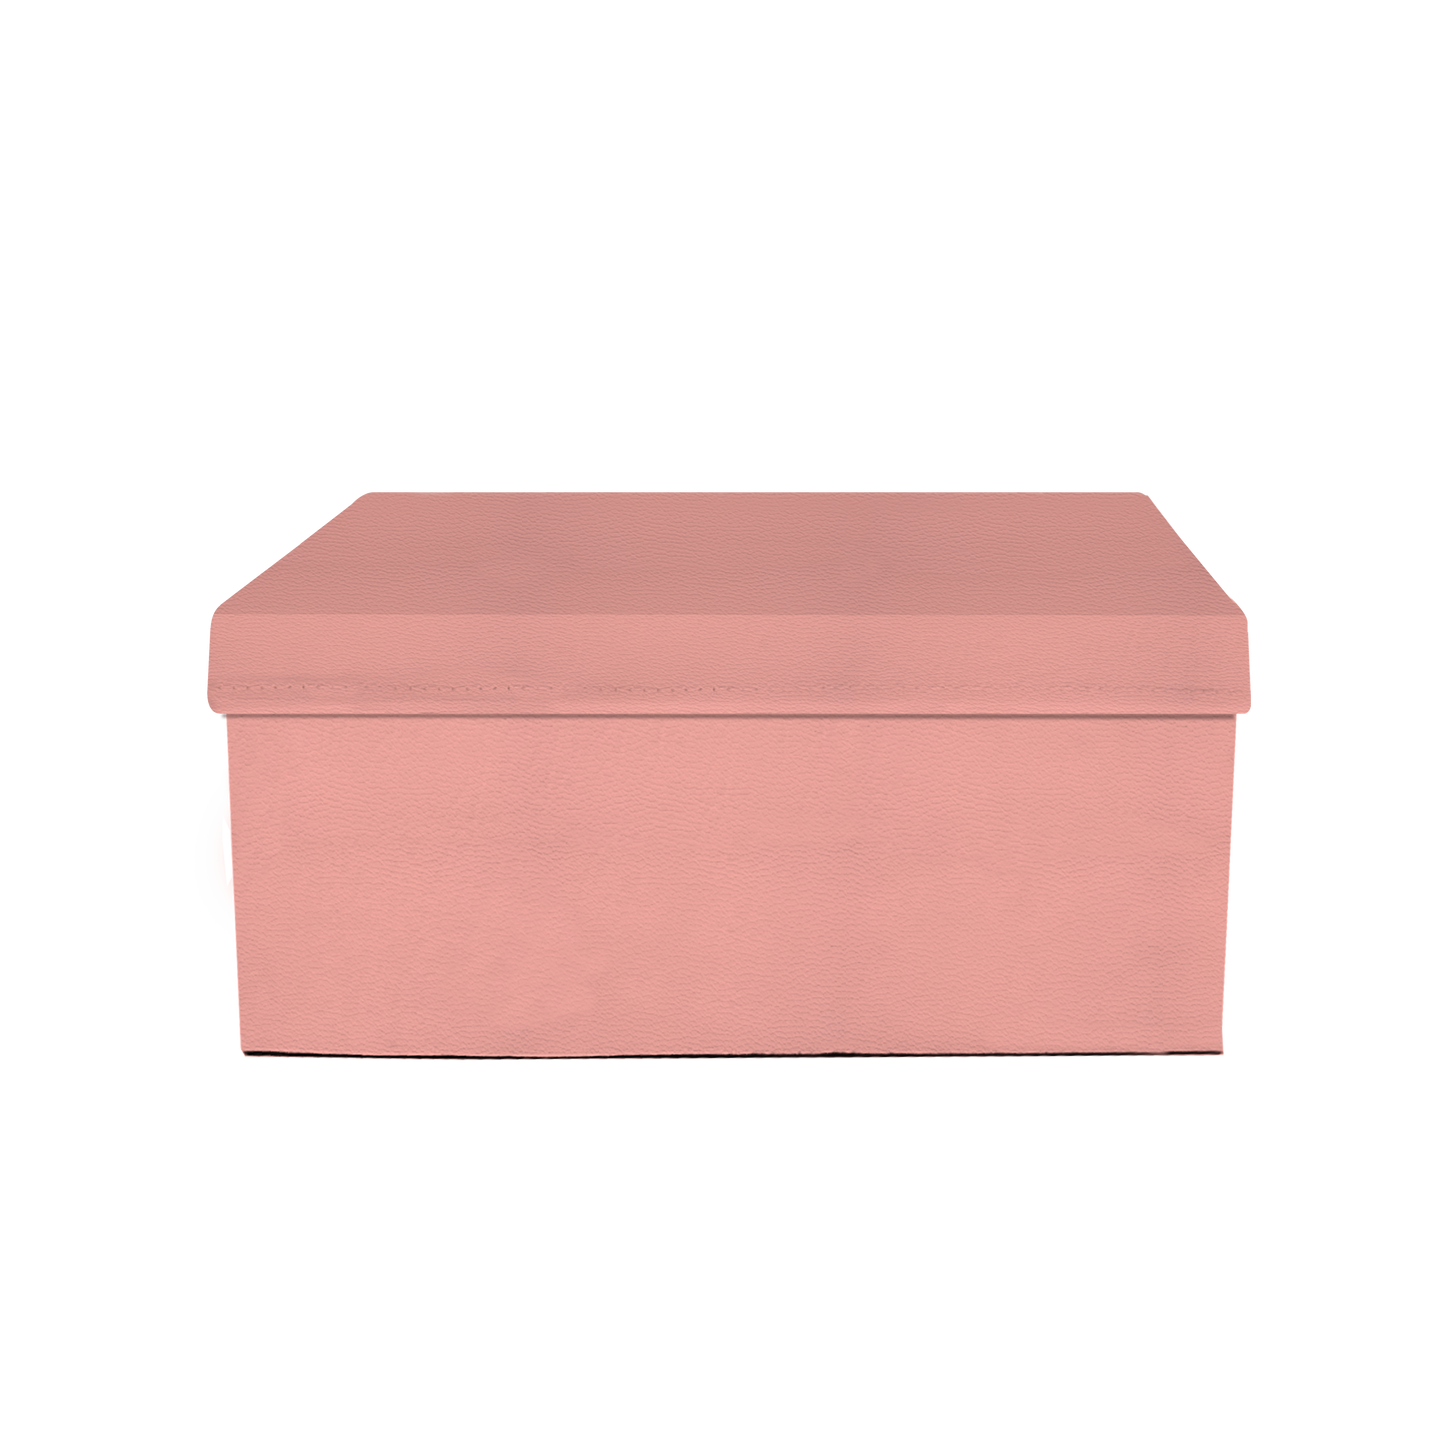 Kit 3 different sizes rectangular shape boxes 3 in 1 - PU Leather Pink